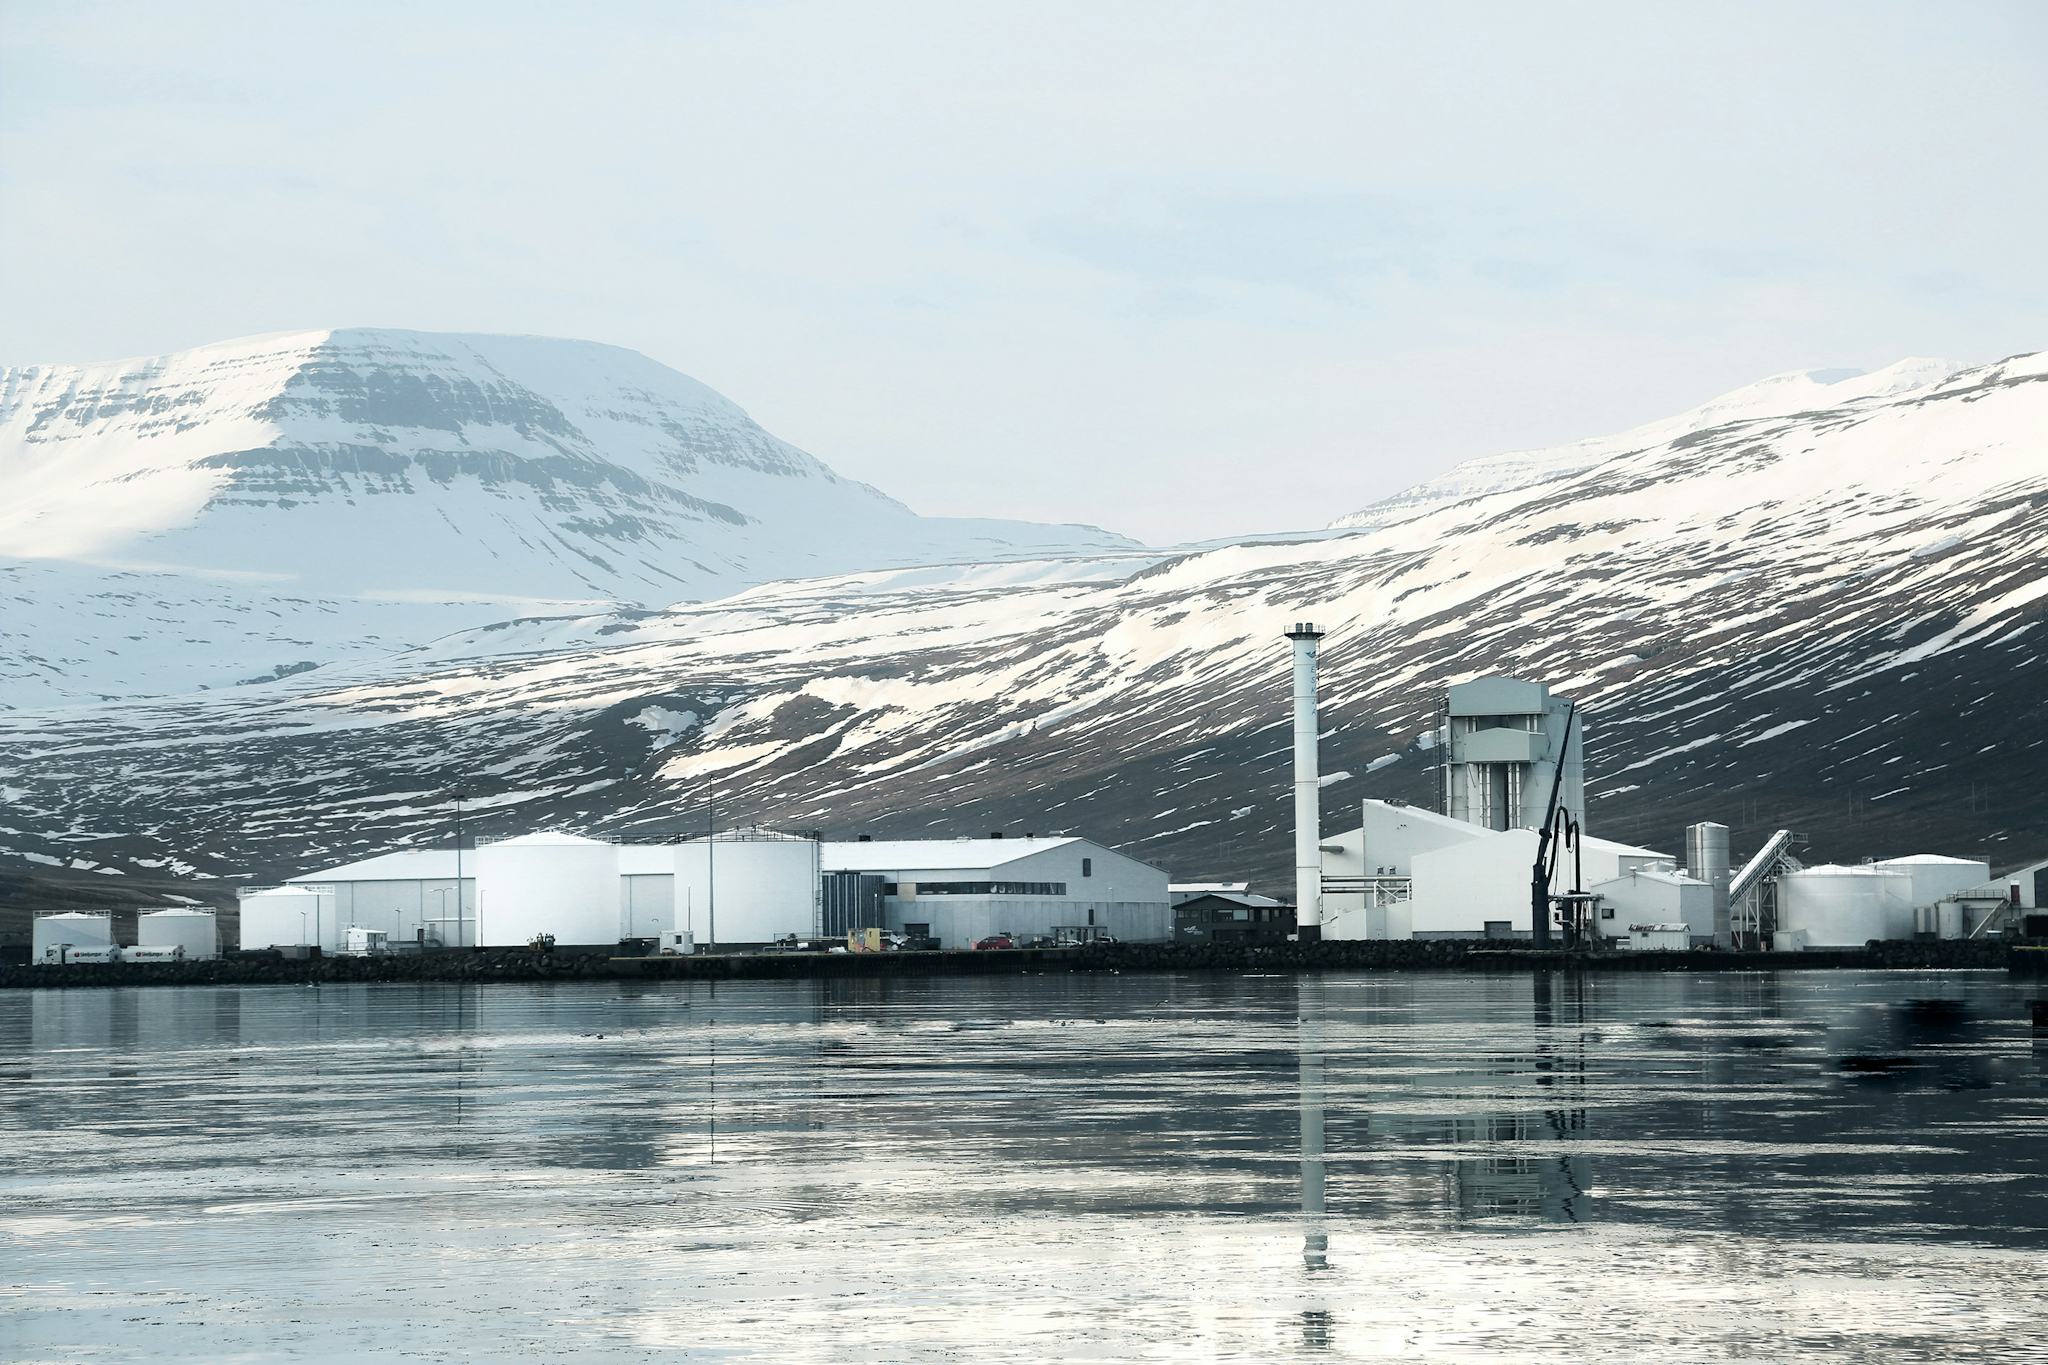 A factory on the quay, snow-capped mountains in the background